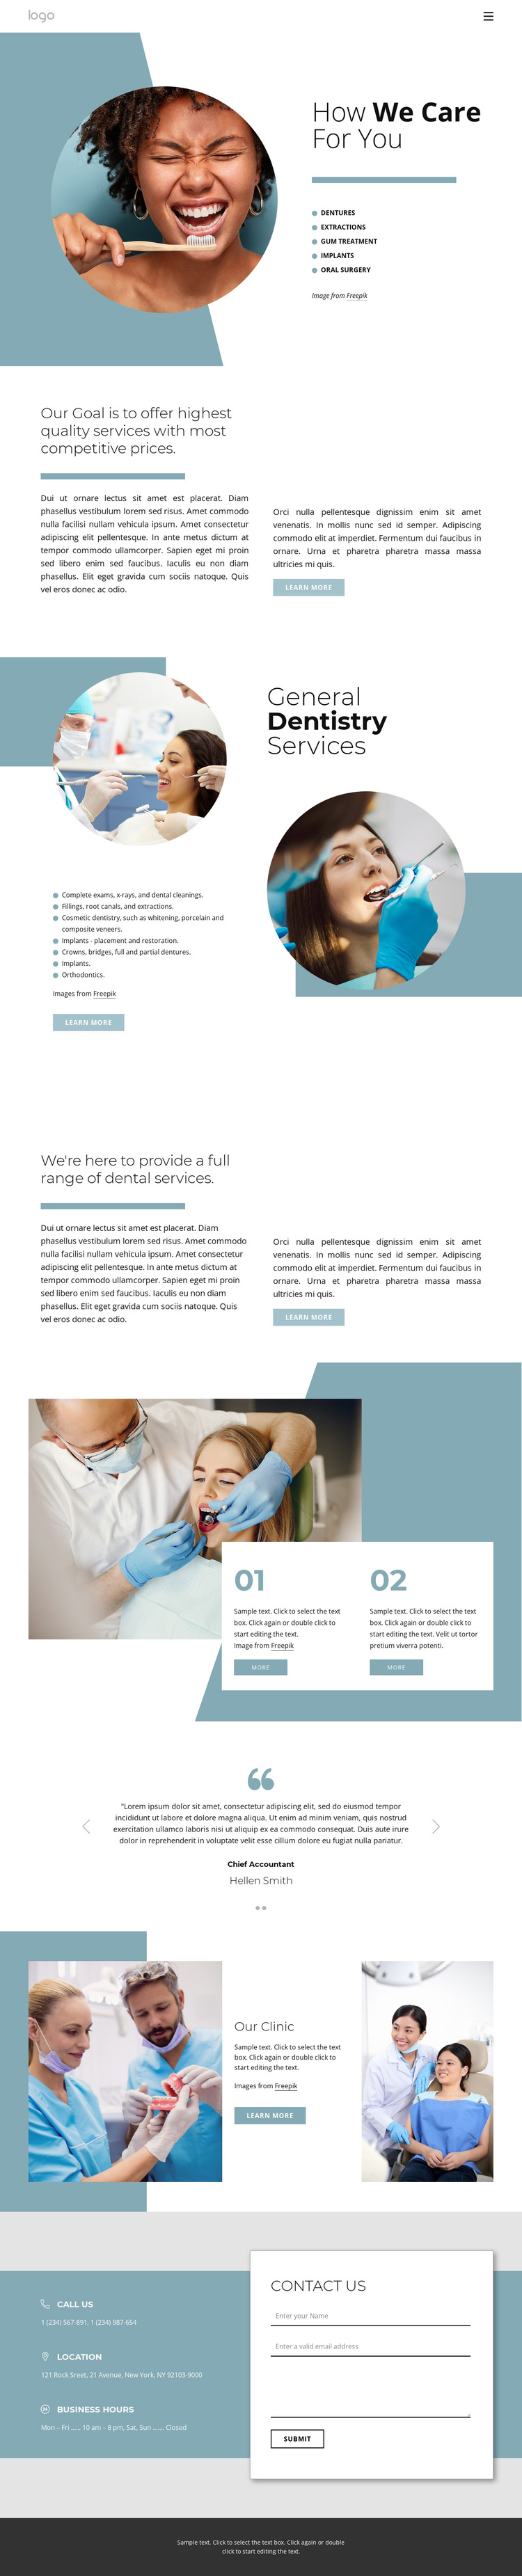 Hight quality dental services Joomla Page Builder